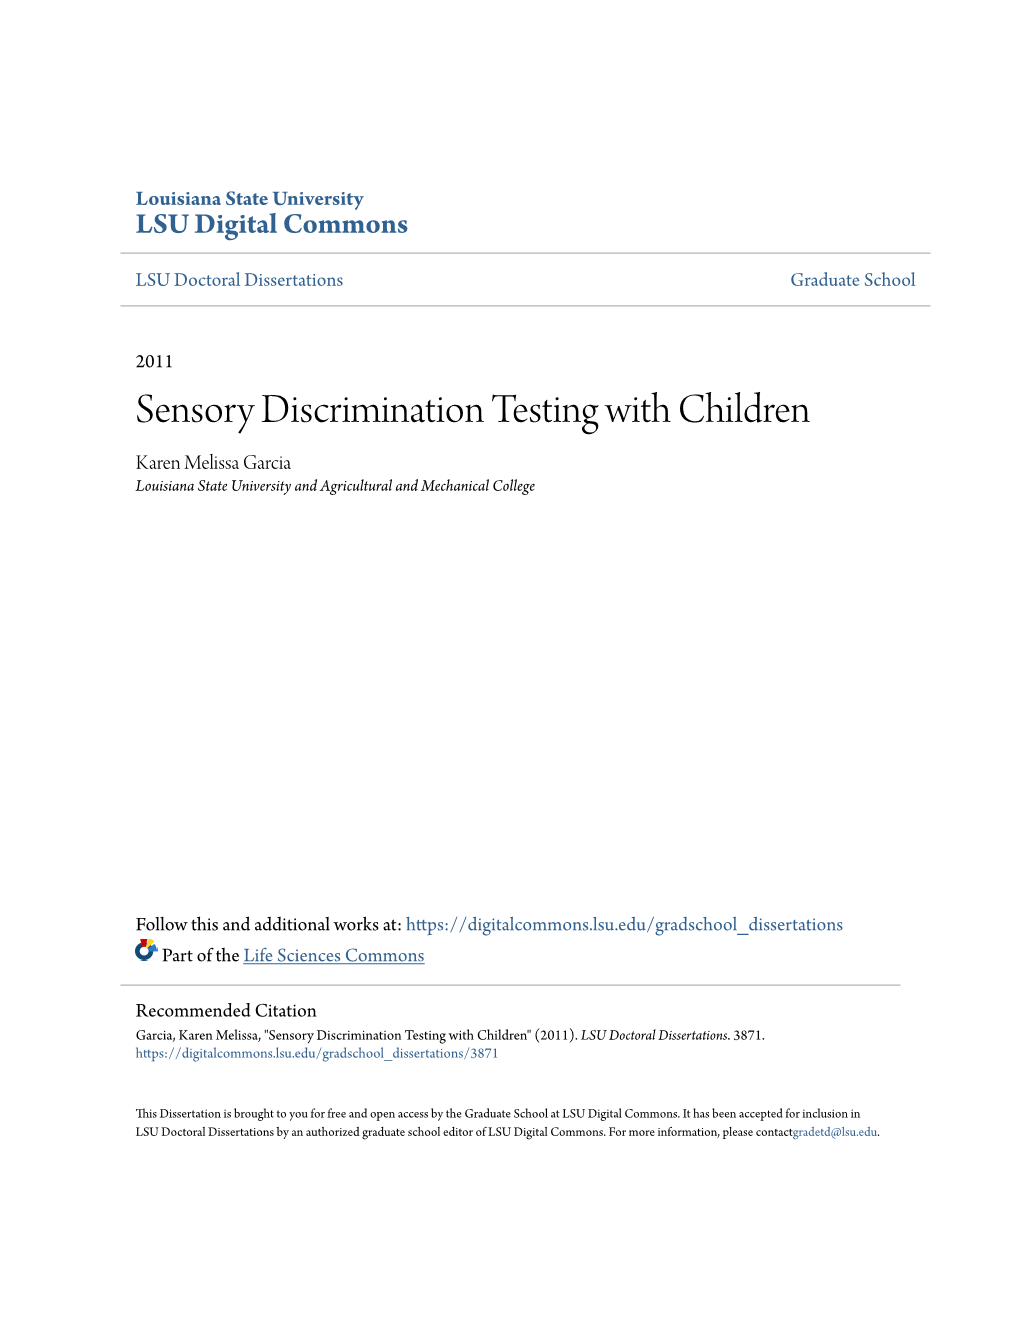 Sensory Discrimination Testing with Children Karen Melissa Garcia Louisiana State University and Agricultural and Mechanical College